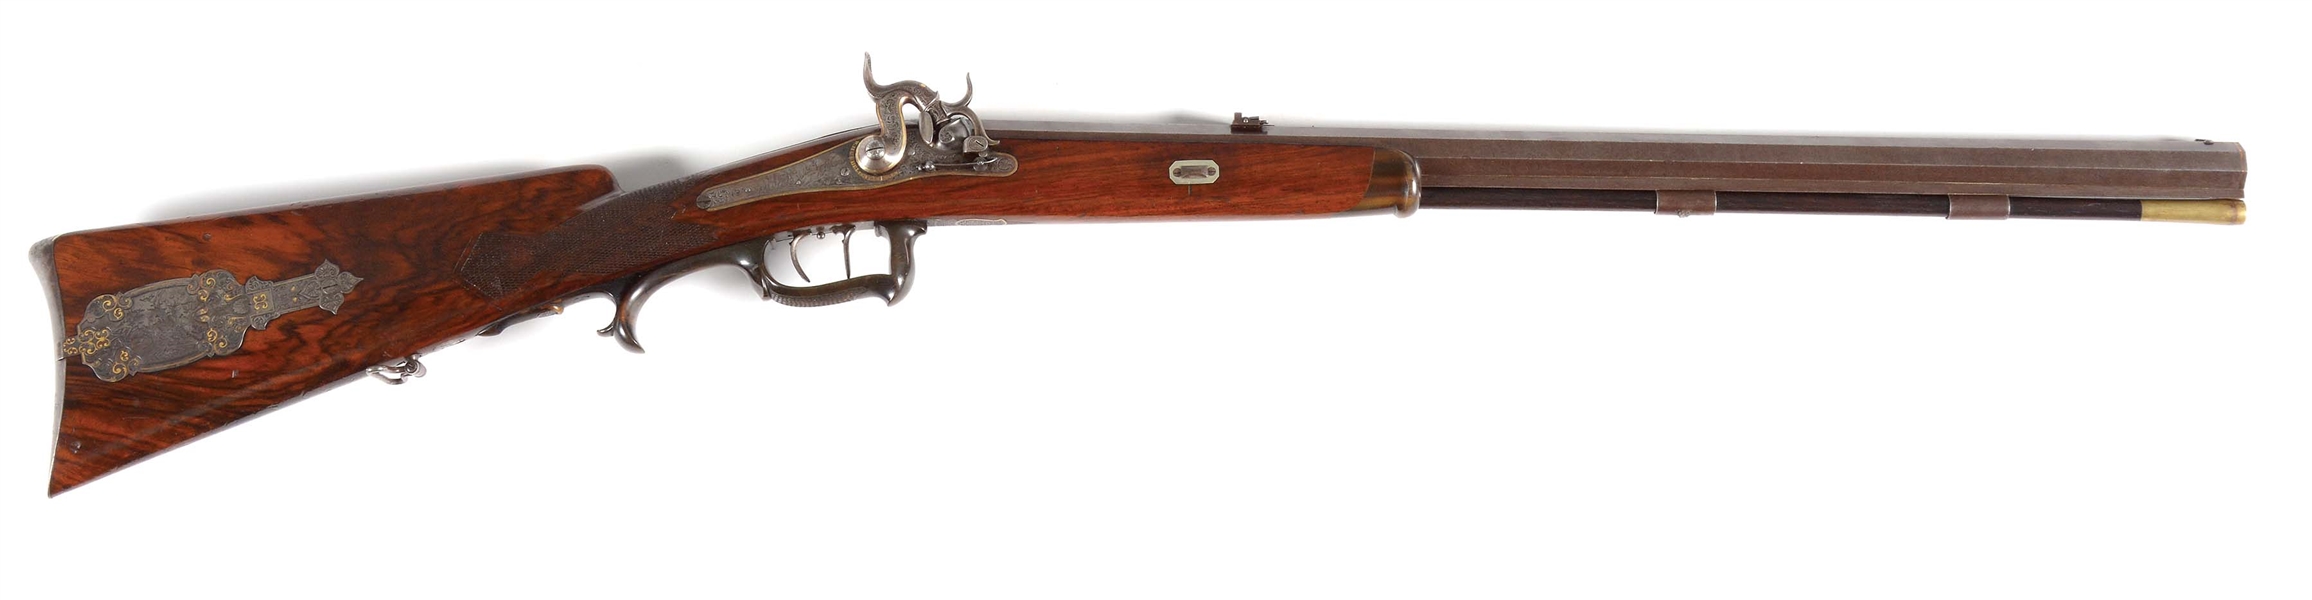 (A) A FINE AND BEAUTIFULLY DECORATED GERMAN PERCUSSION STALKING RIFLE BY WILHELM HUEBEL MEININGEN, CIRCA 1845.